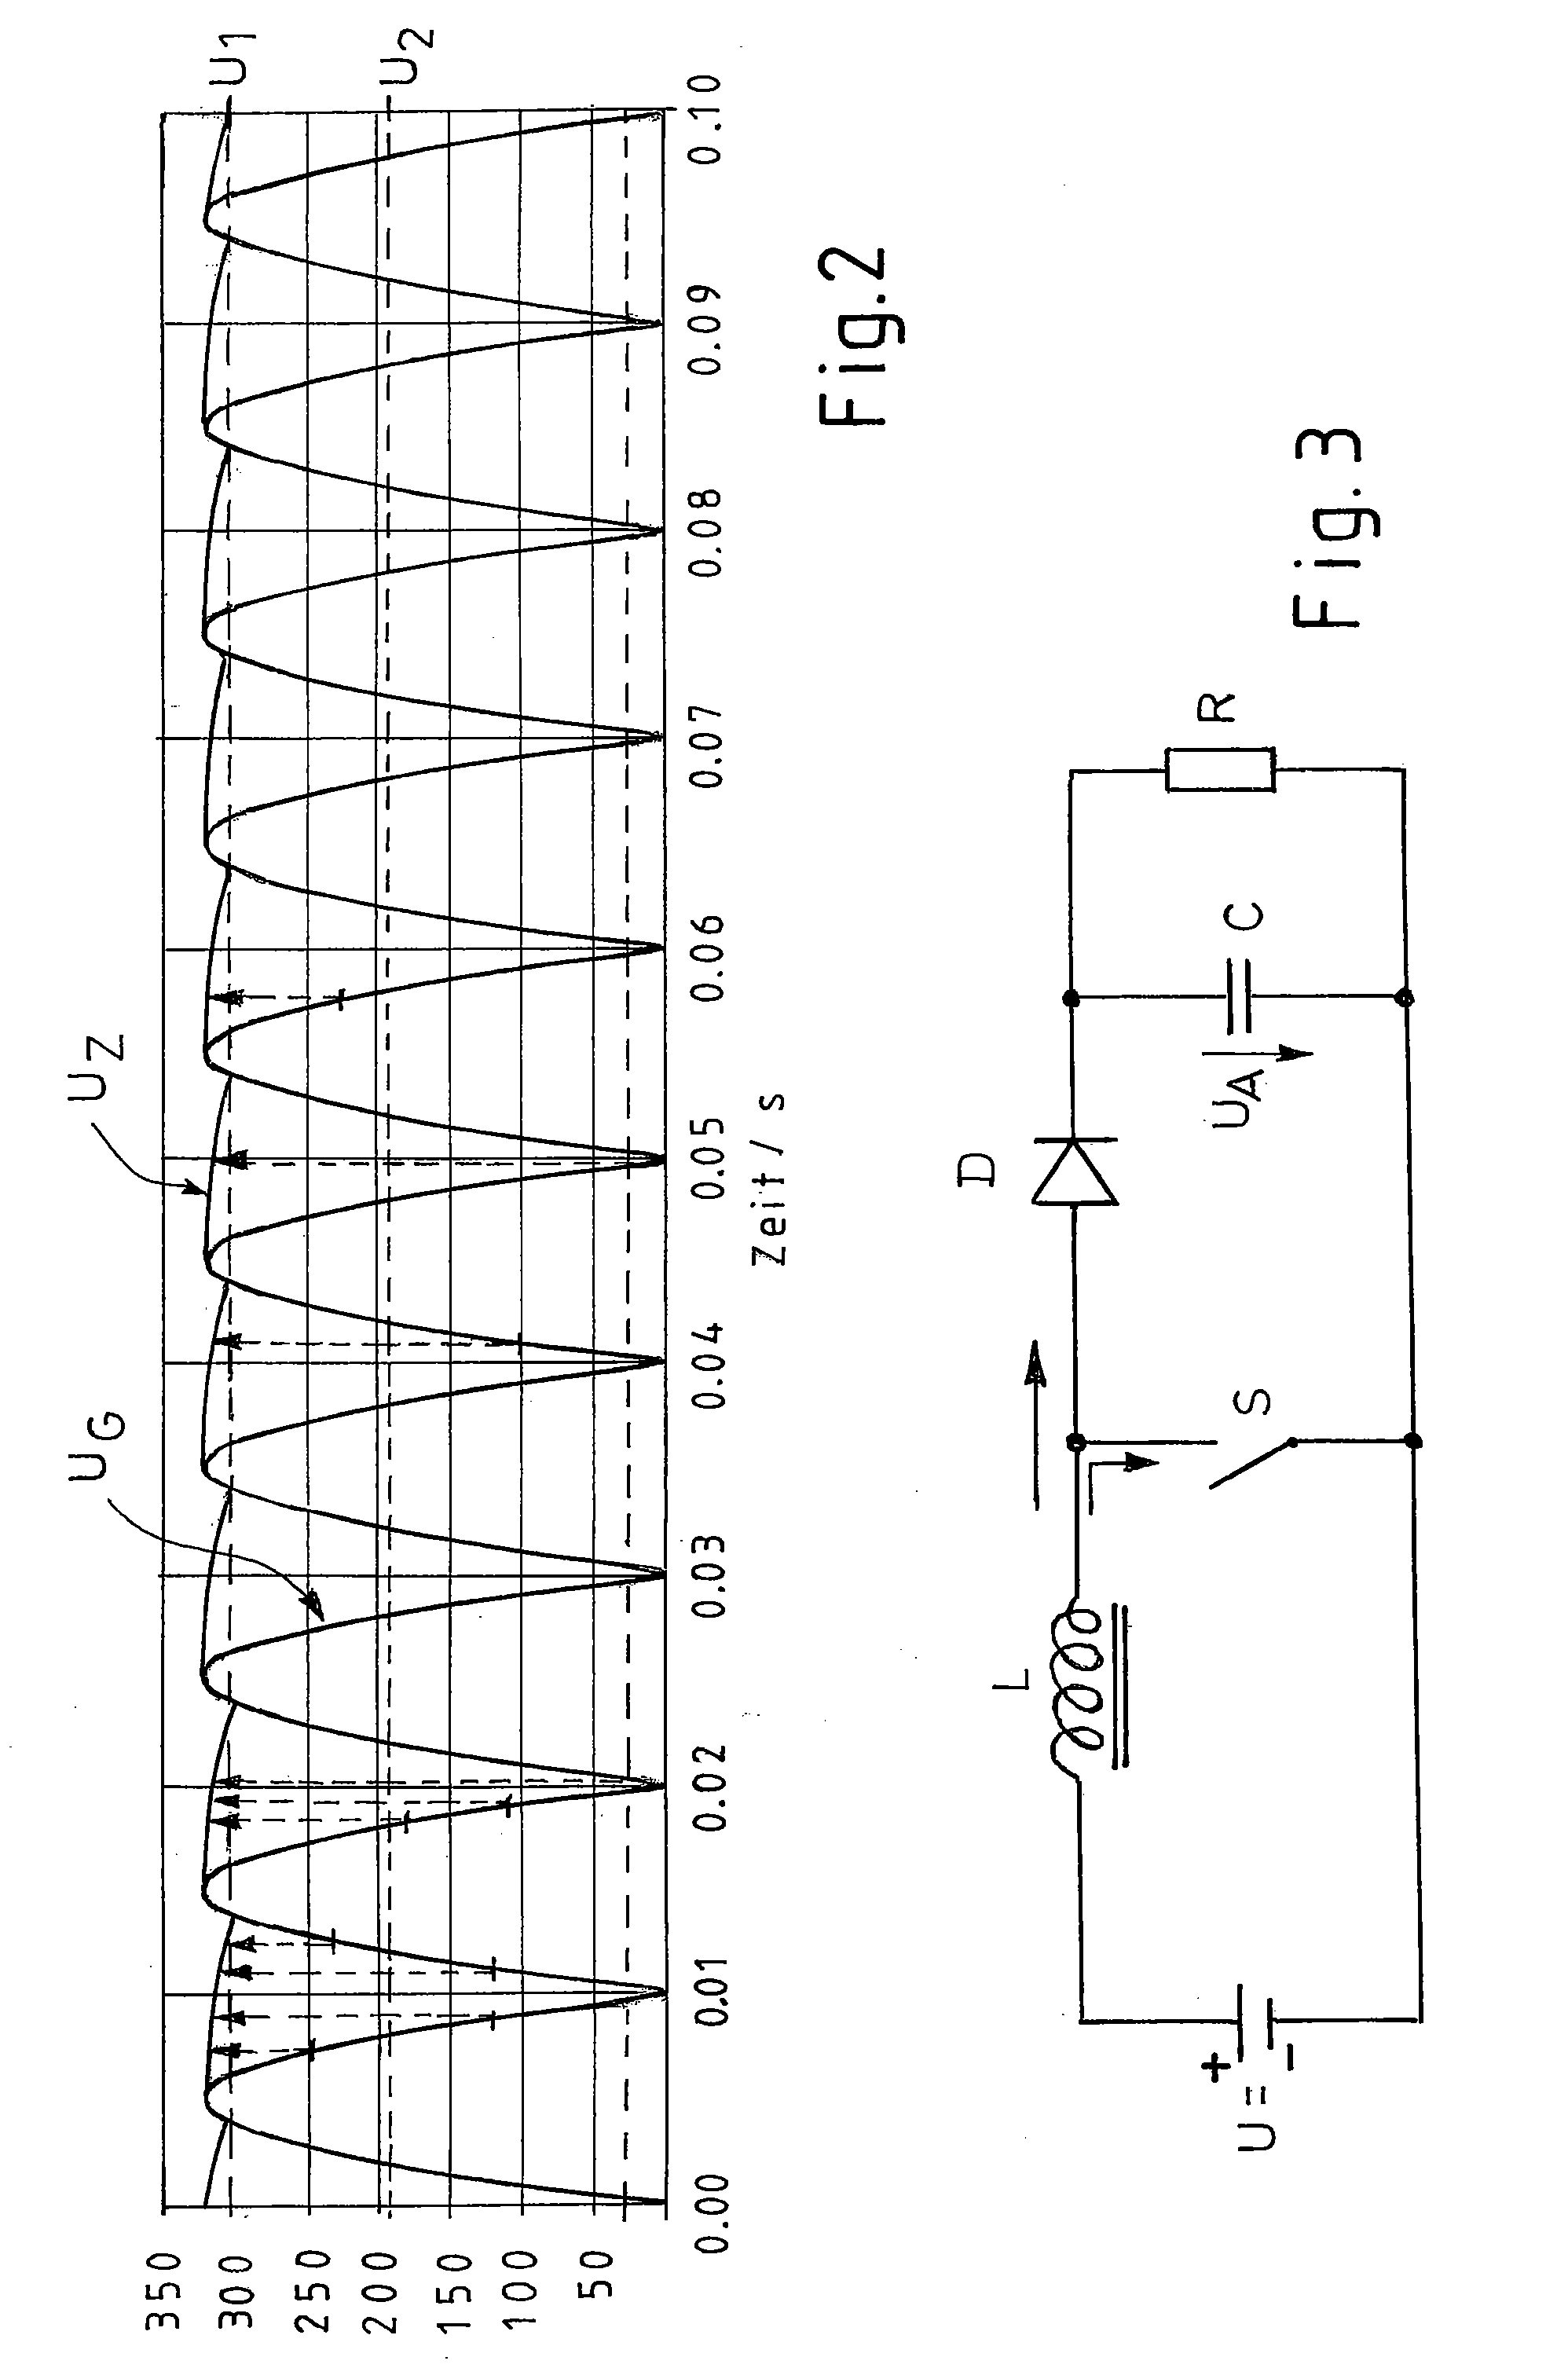 Procedures and Control System to Control a Brushless Electric Motor